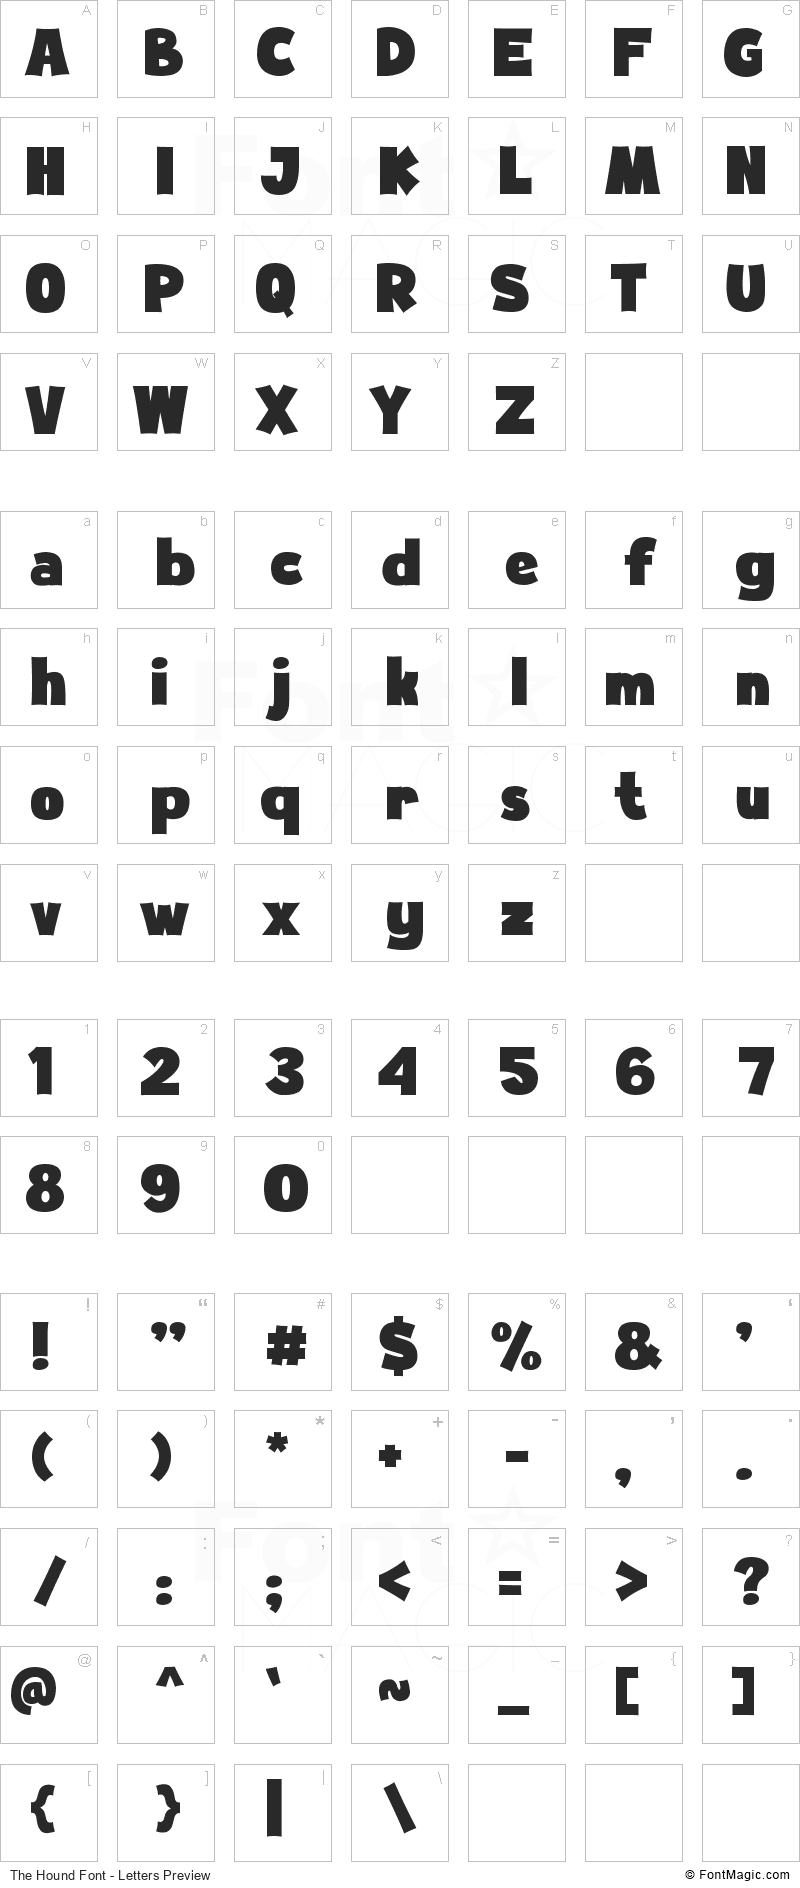 The Hound Font - All Latters Preview Chart